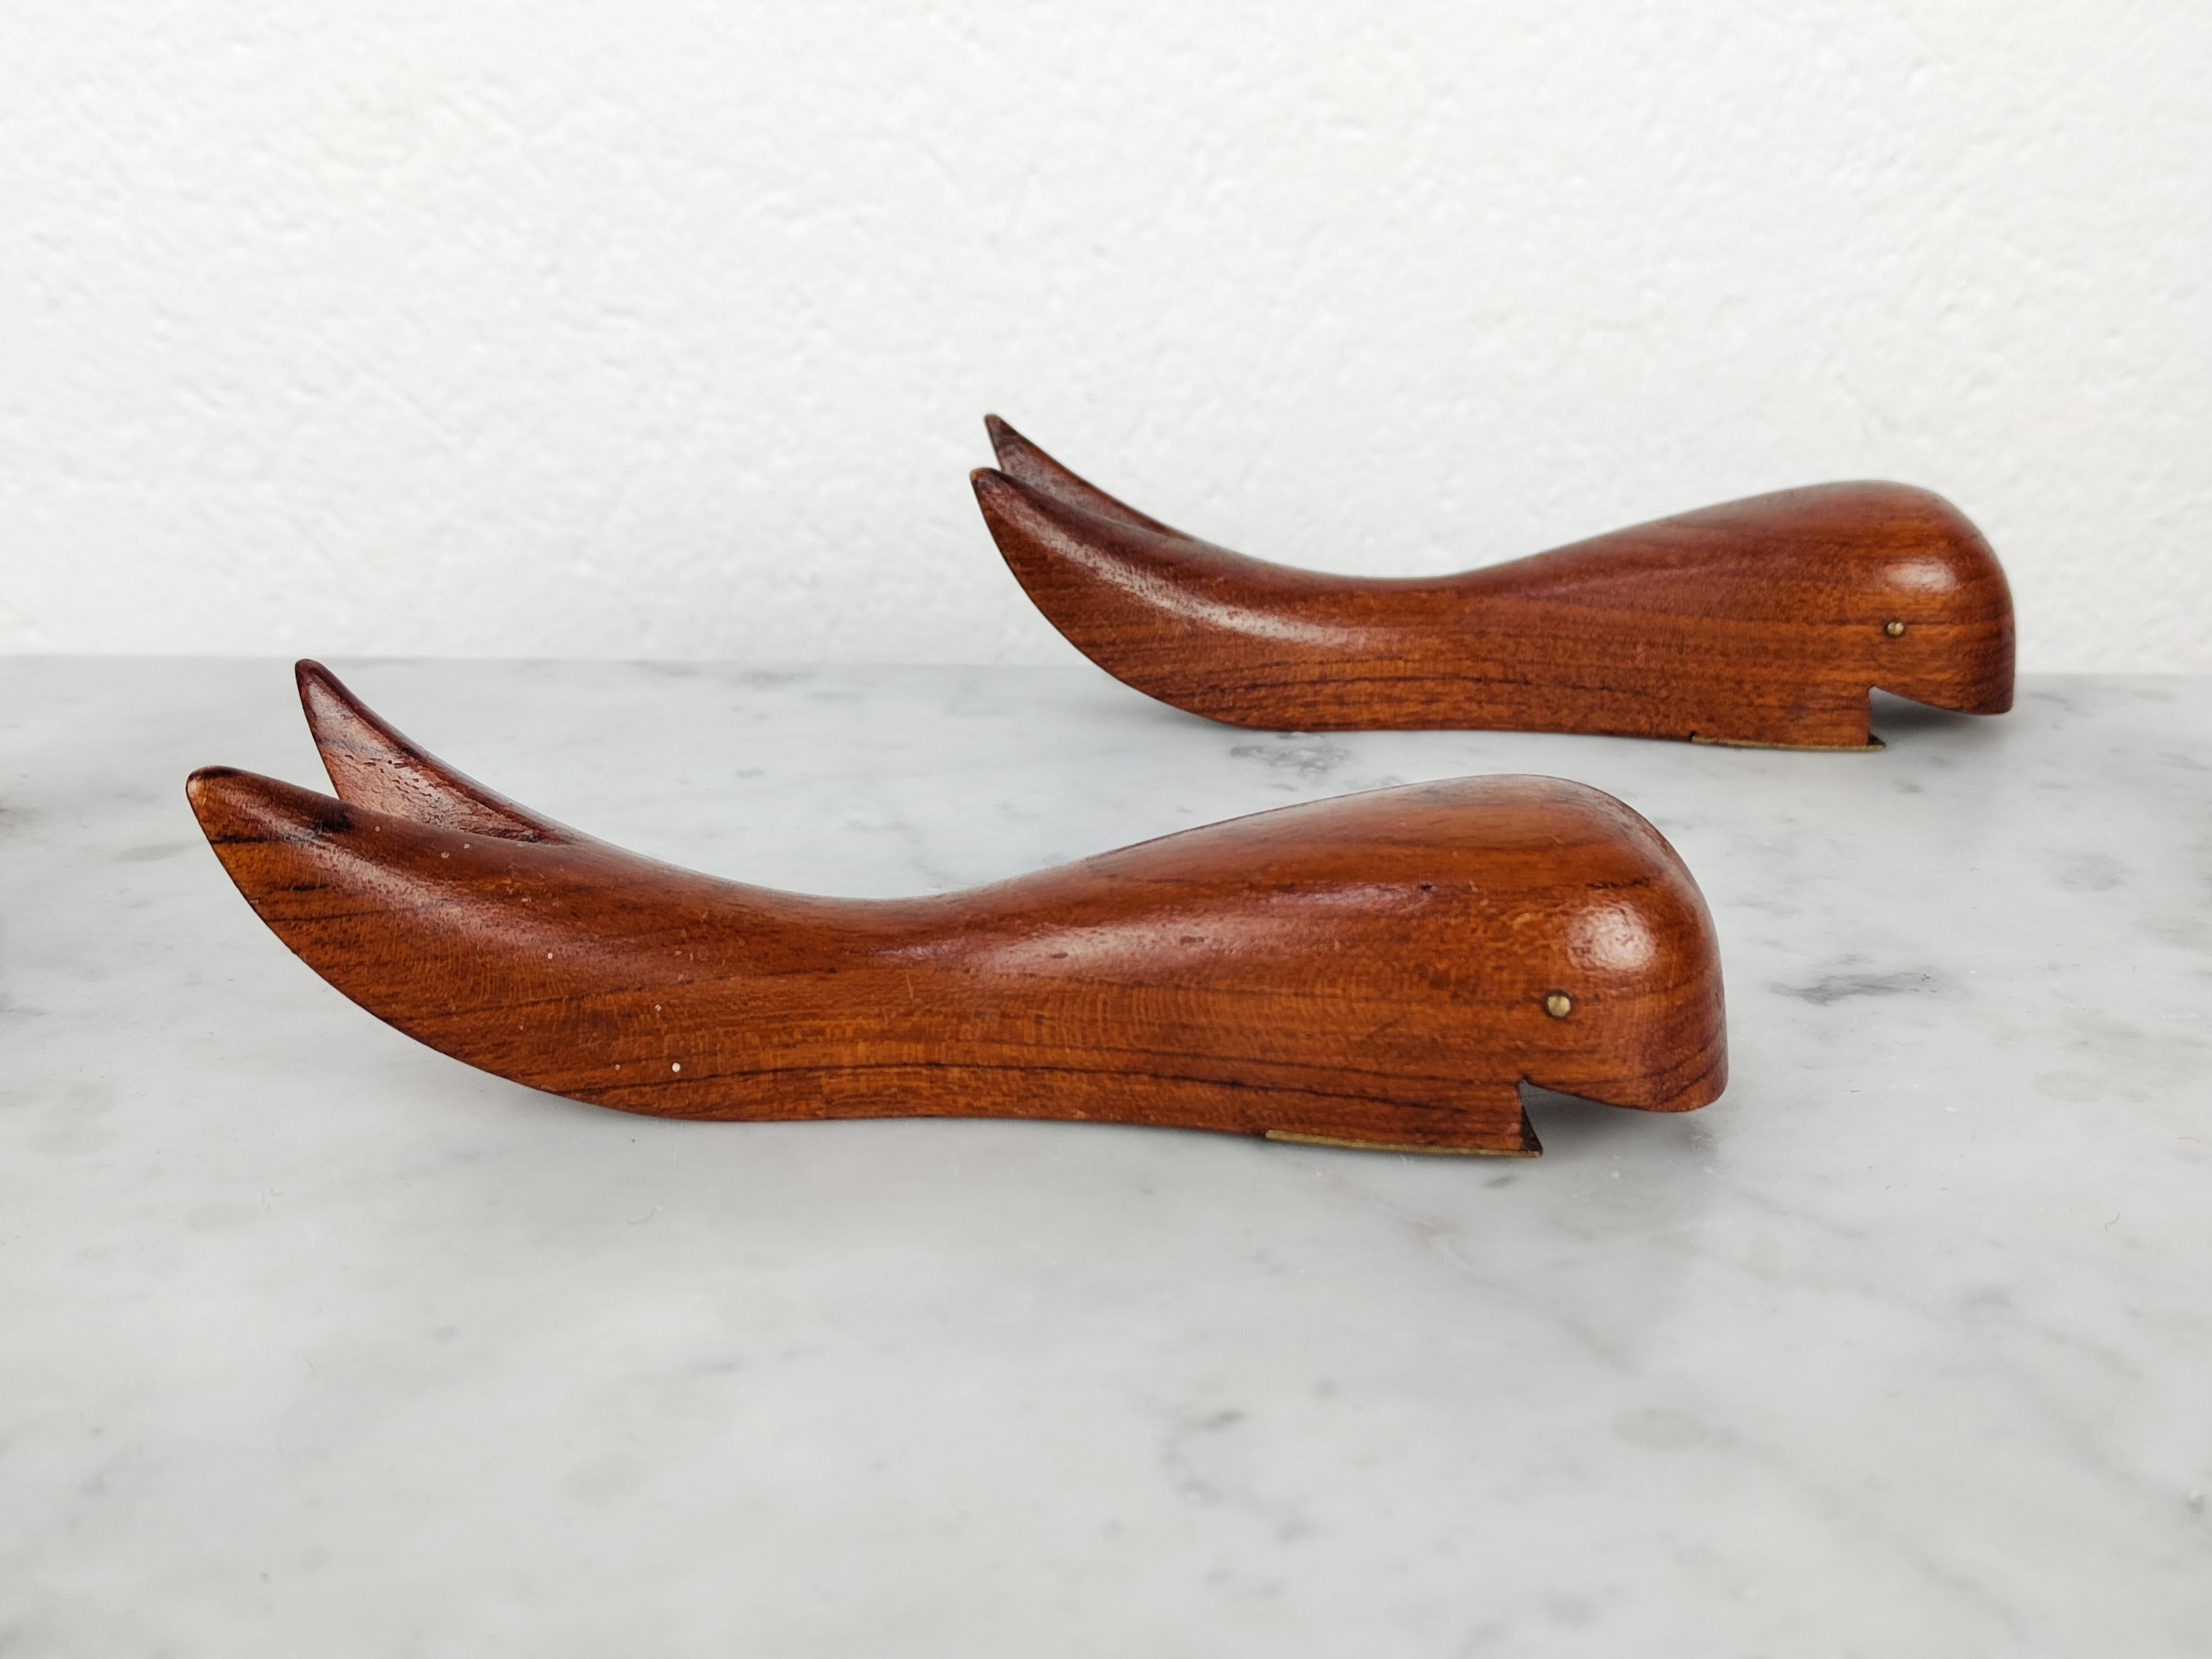 In this listing you will find Danish Mid Century Modern bottle openers made of teak wood. They feature shape of the whale, with brass details as their mouth used to open the bottles. Exquisite and very elegant craftsmanship. Good vintage condition